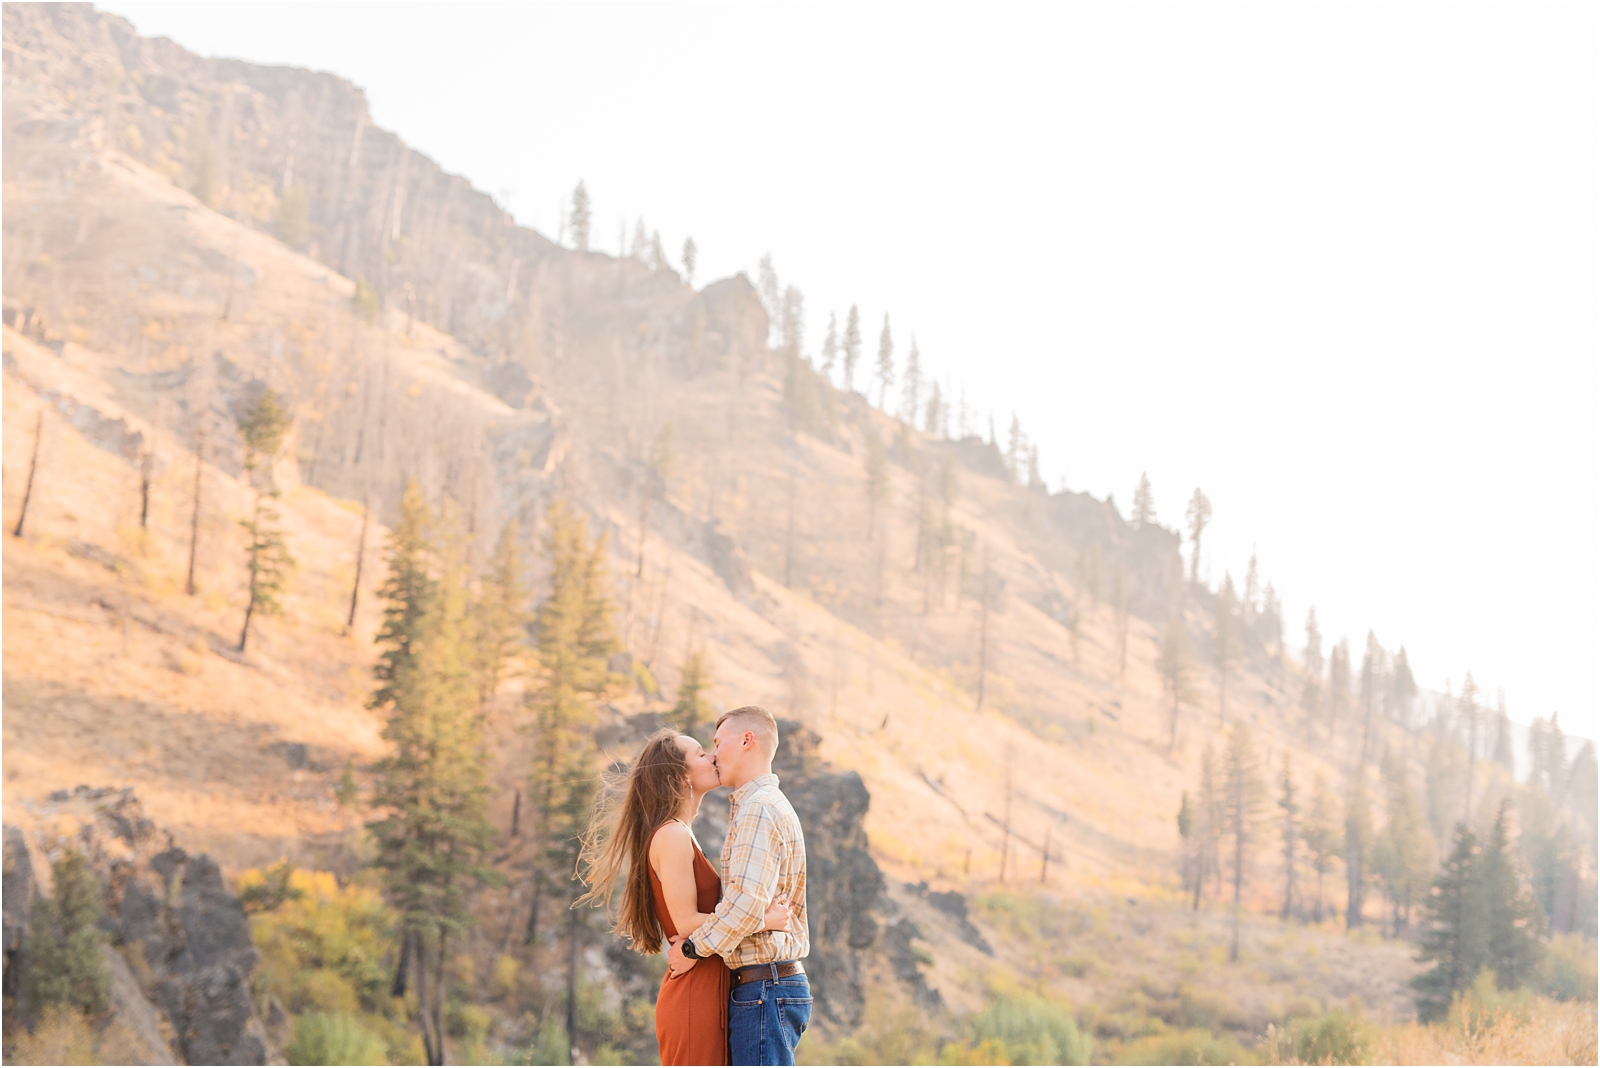 Couple kissing during couples' photo session with mountain cliffs in the background in Boise Idaho. Photo by Miranda Renee Photography